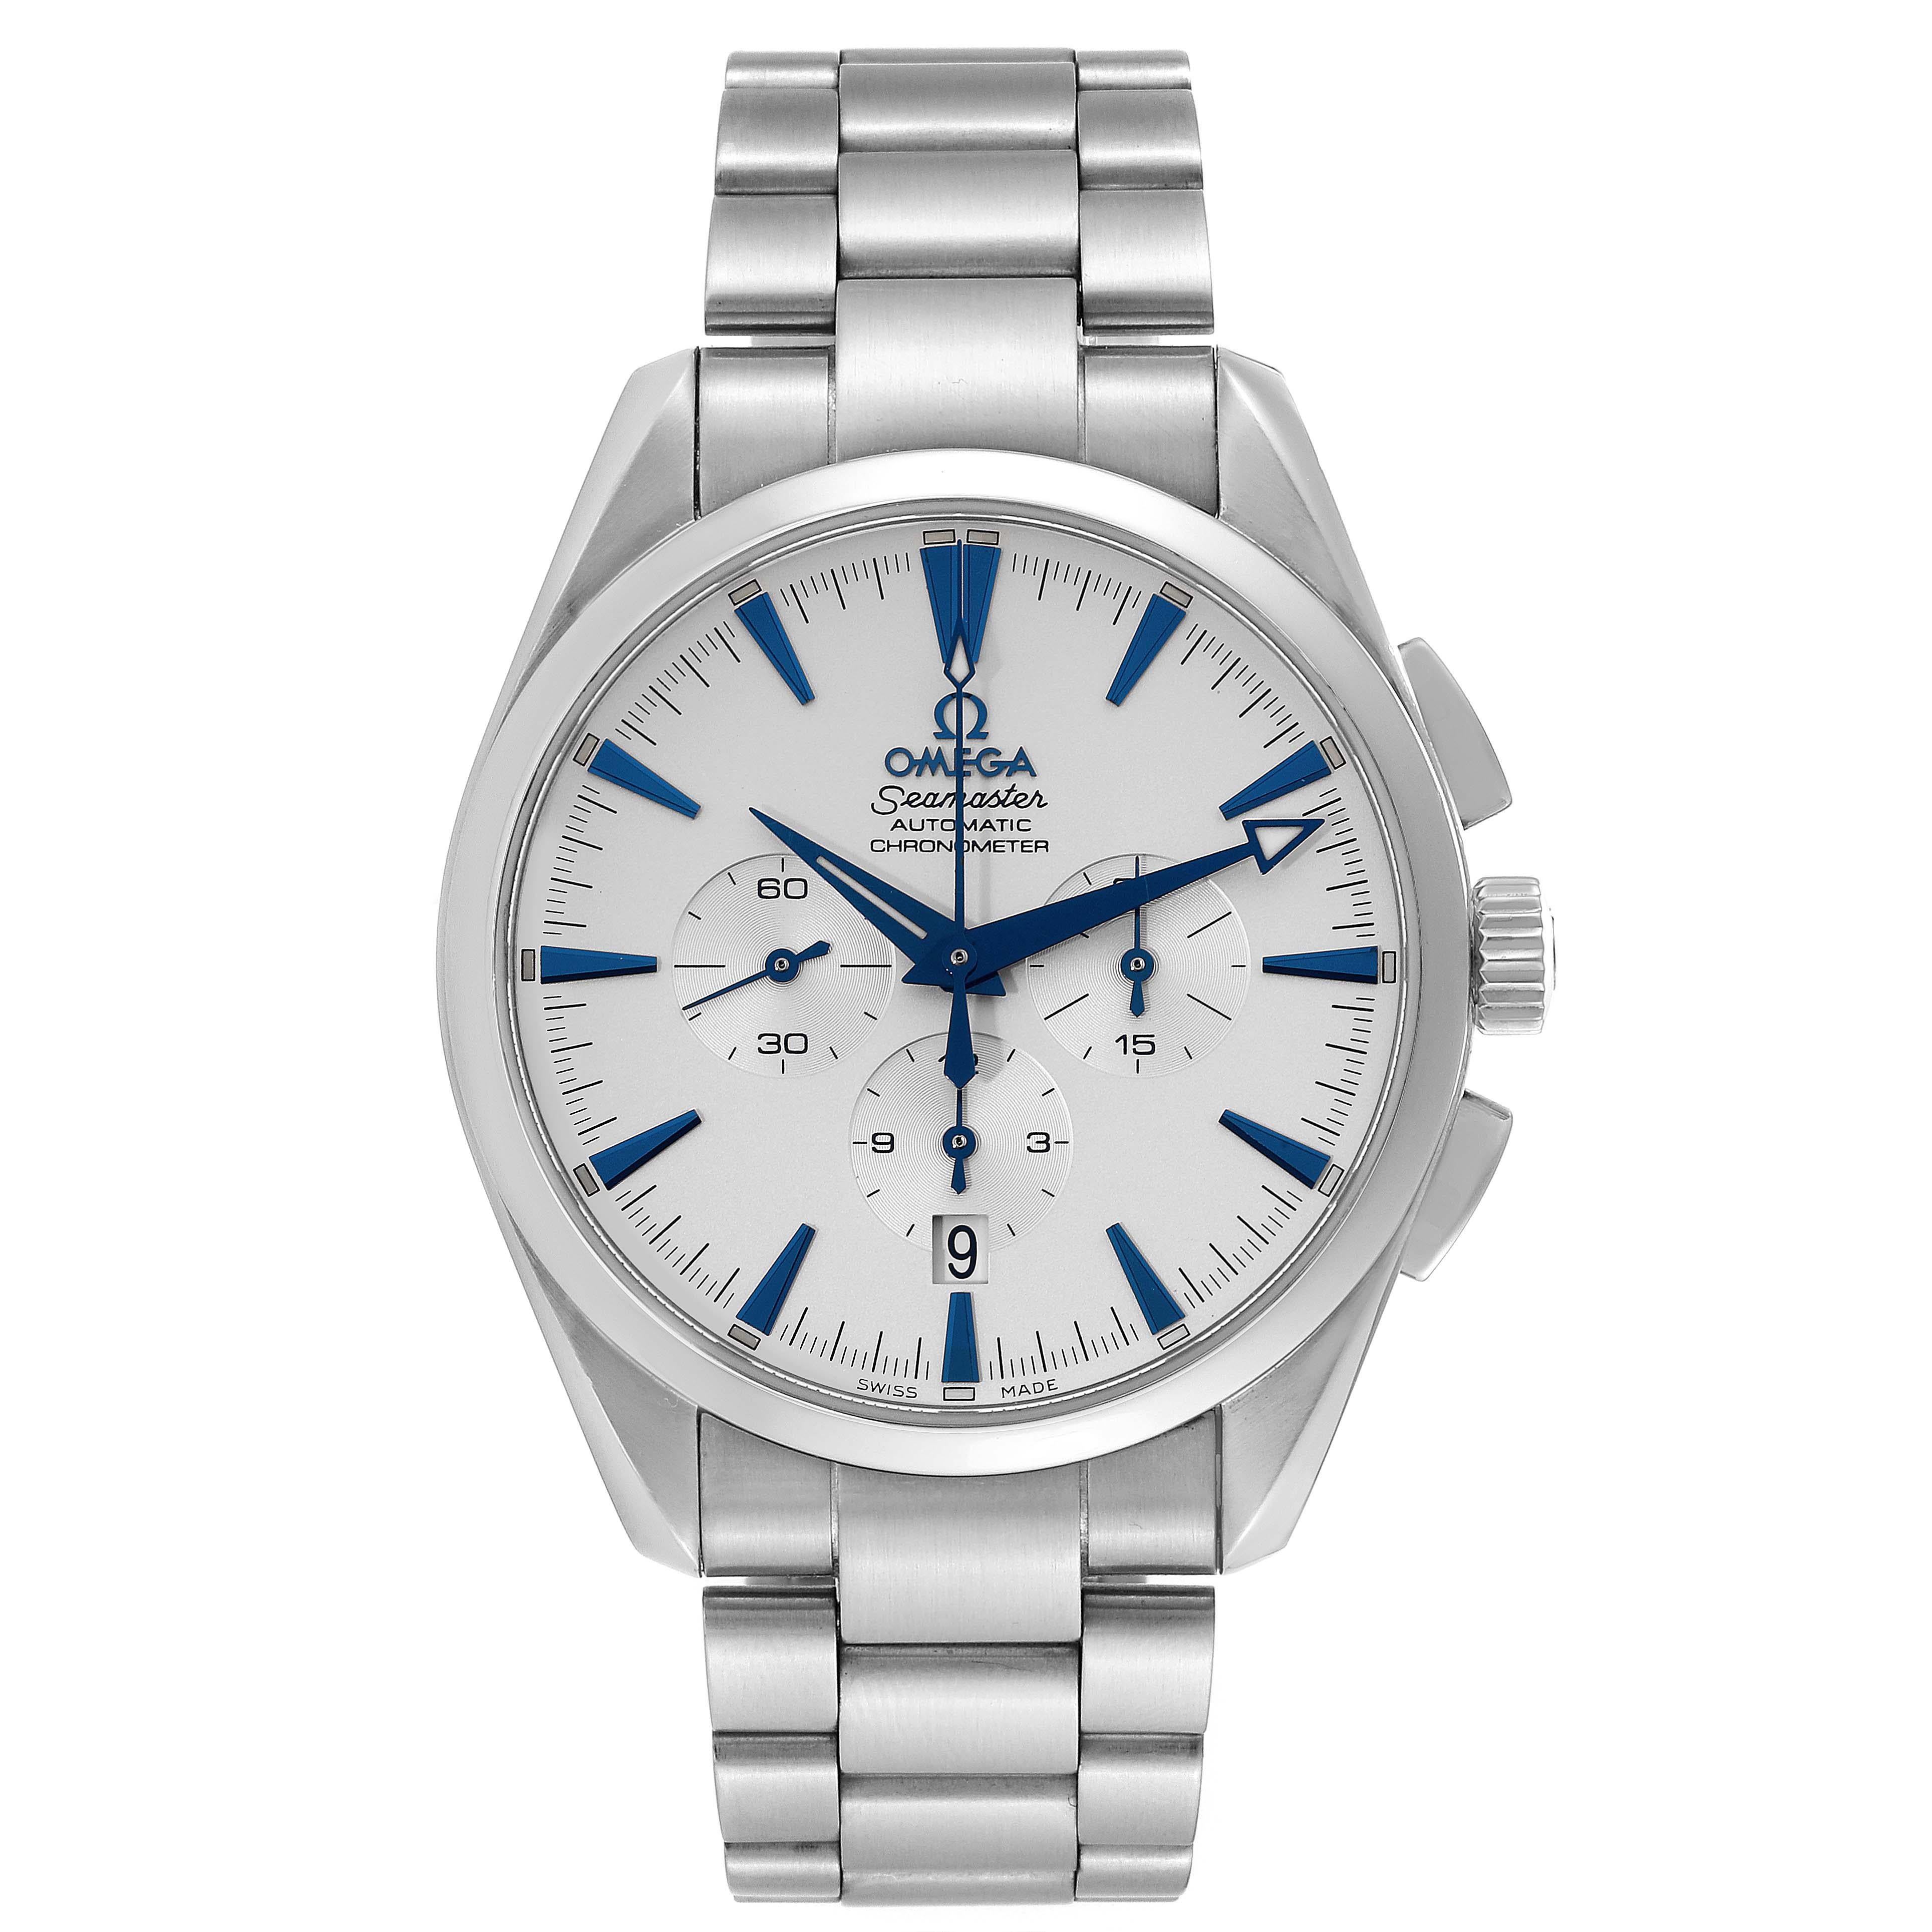 Omega Seamaster Aqua Terra XL Steel Mens Watch 2512.30.00. Automatic self-winding chronograph movement. Stainless steel round case 42.2 mm in diameter. Stainless steel smooth bezel. Scratch resistant sapphire crystal. Silvered dial with blue index